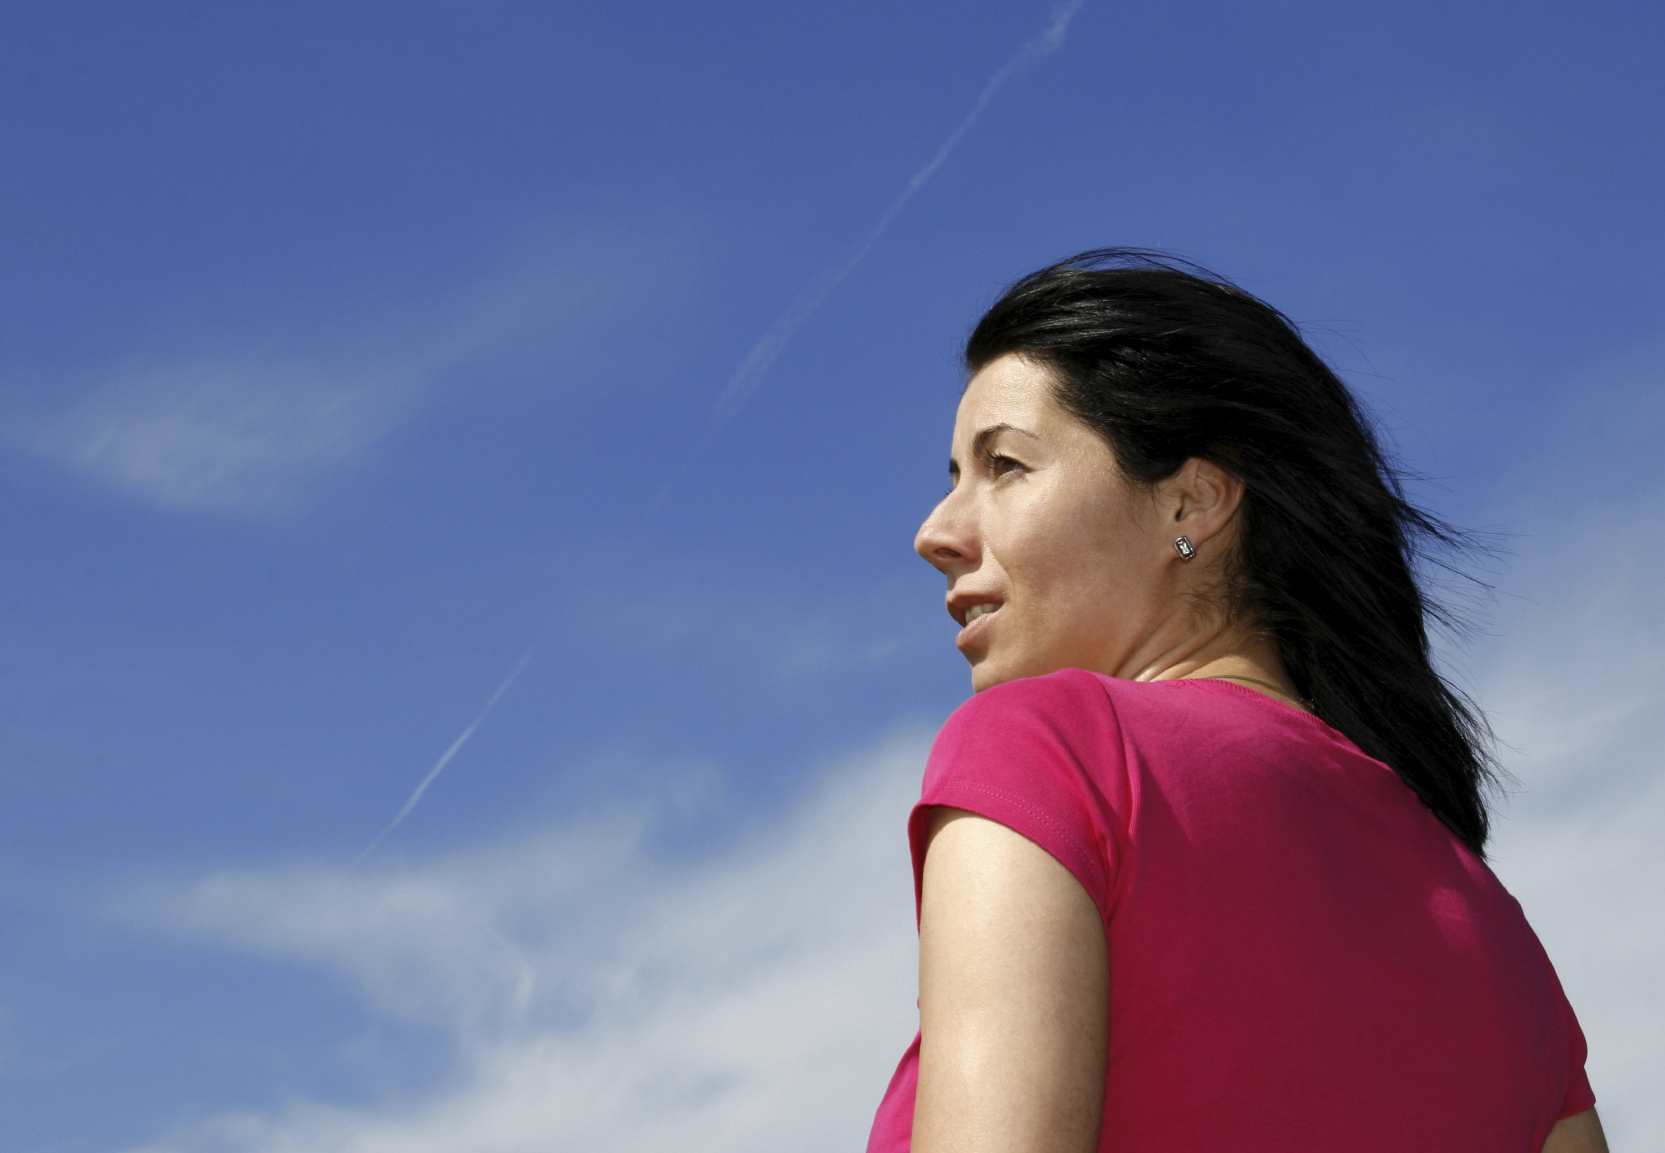 dark haired woman looking away in front of a blue sky